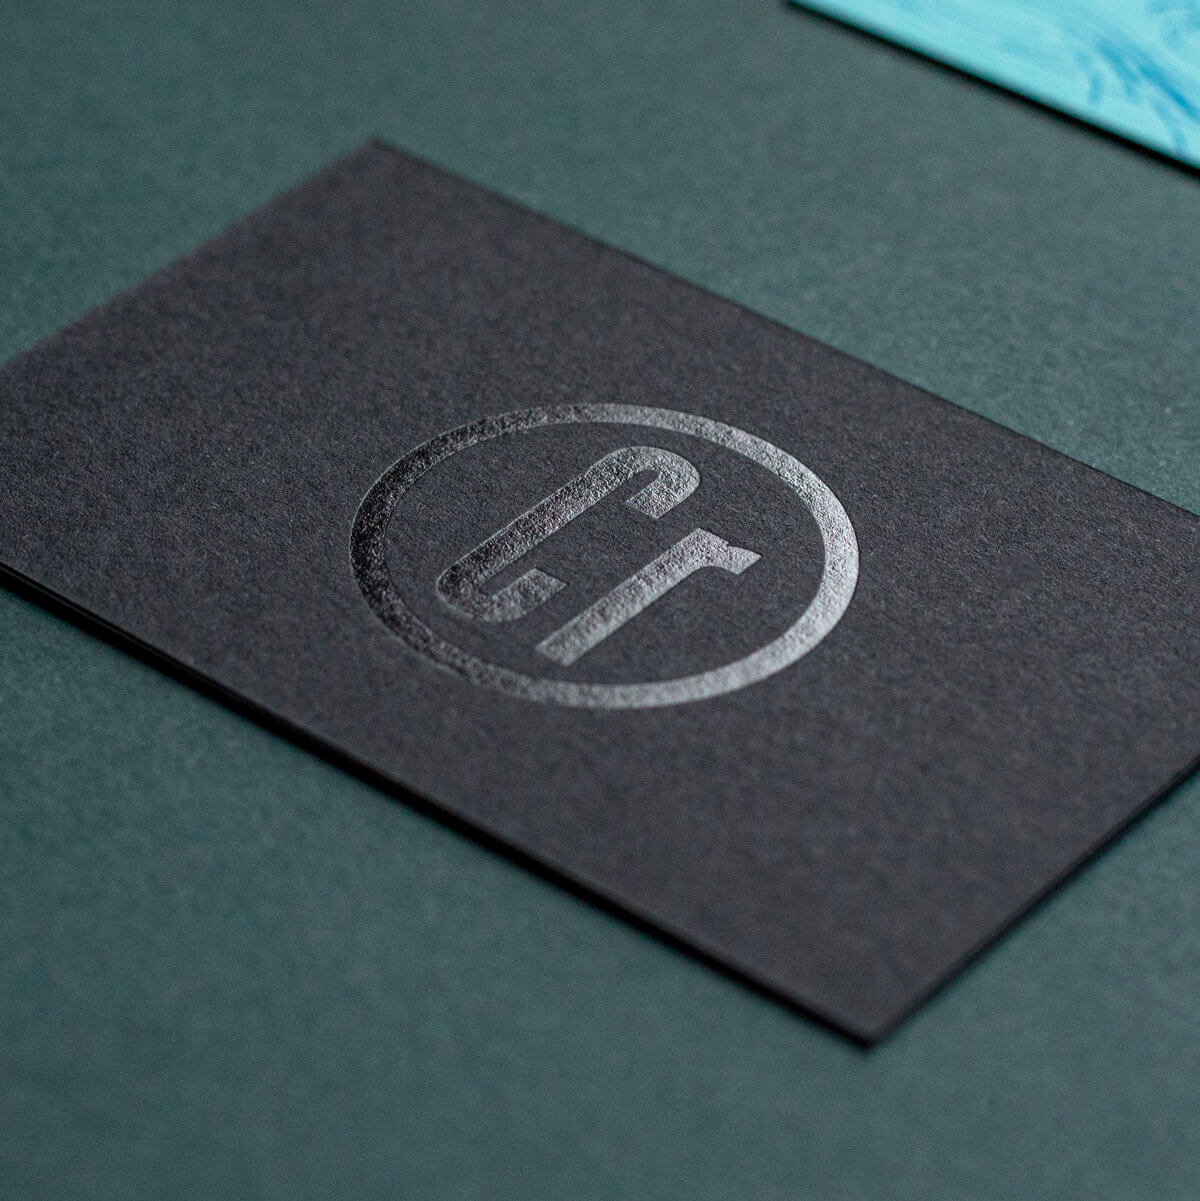 a premium textured black business card with a corporate logo foiled in black with the letters Cr